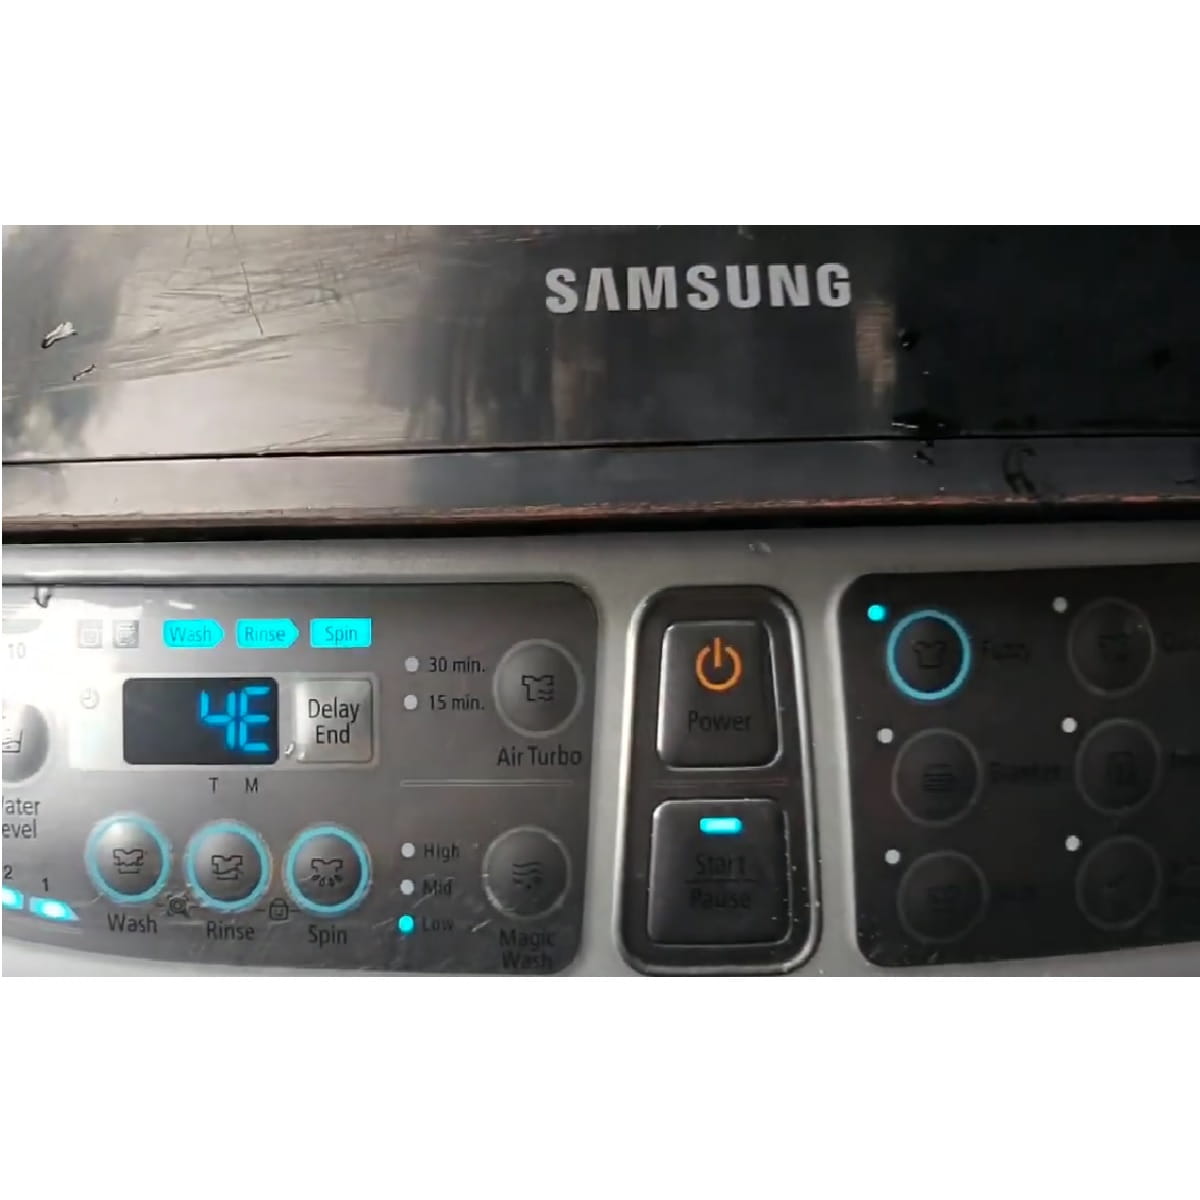 Samsung washer 4e code but full of water